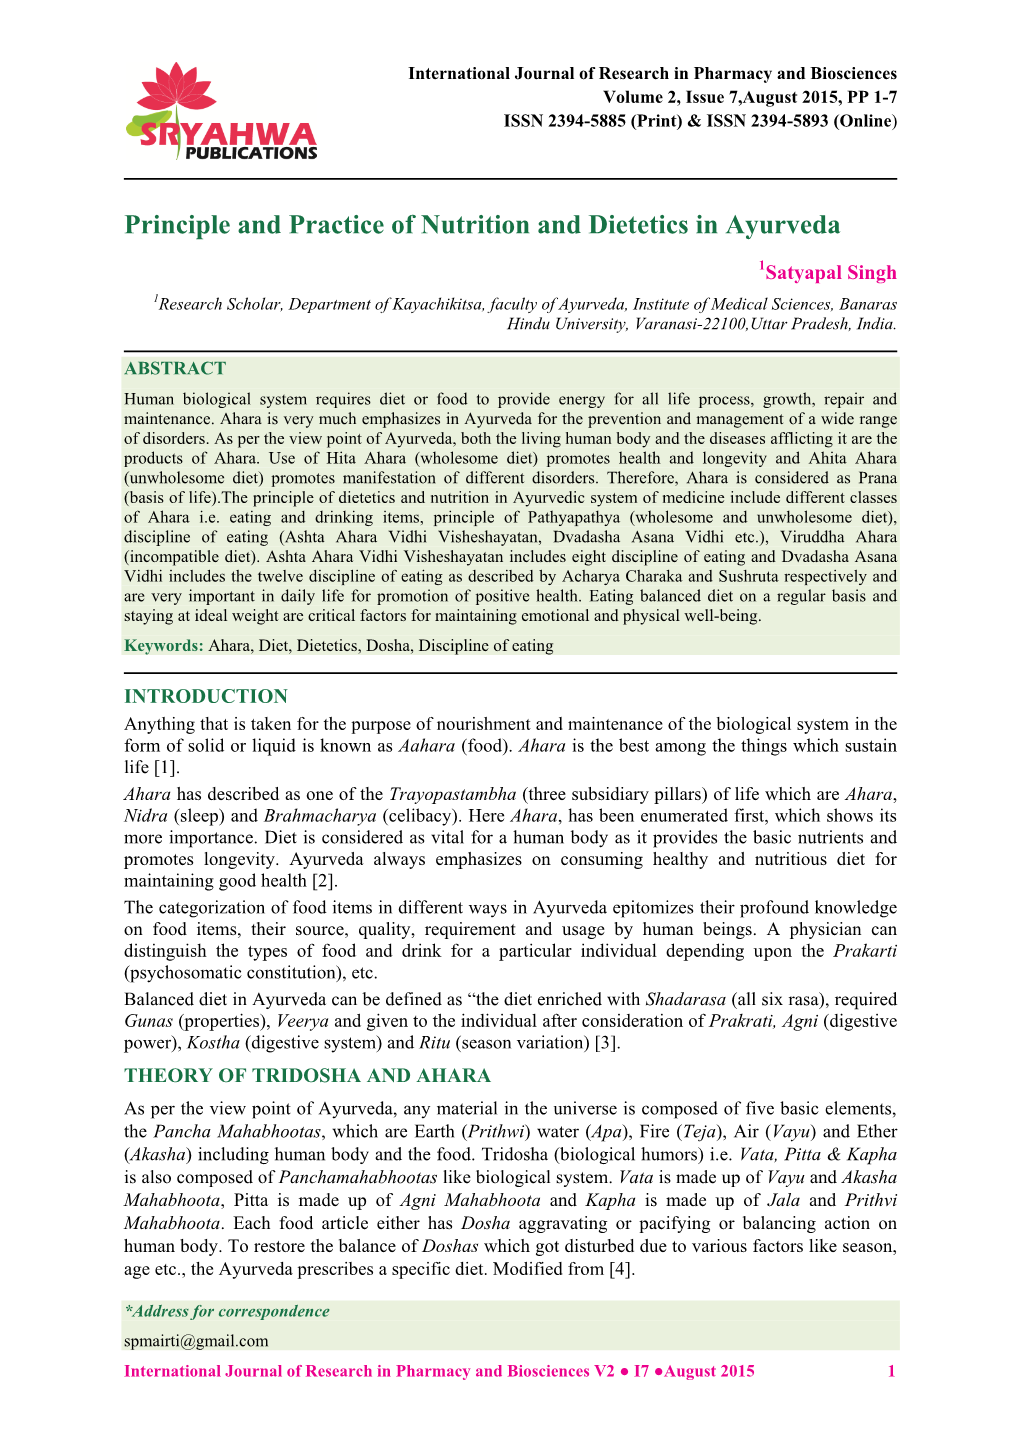 Principle and Practice of Nutrition and Dietetics in Ayurveda